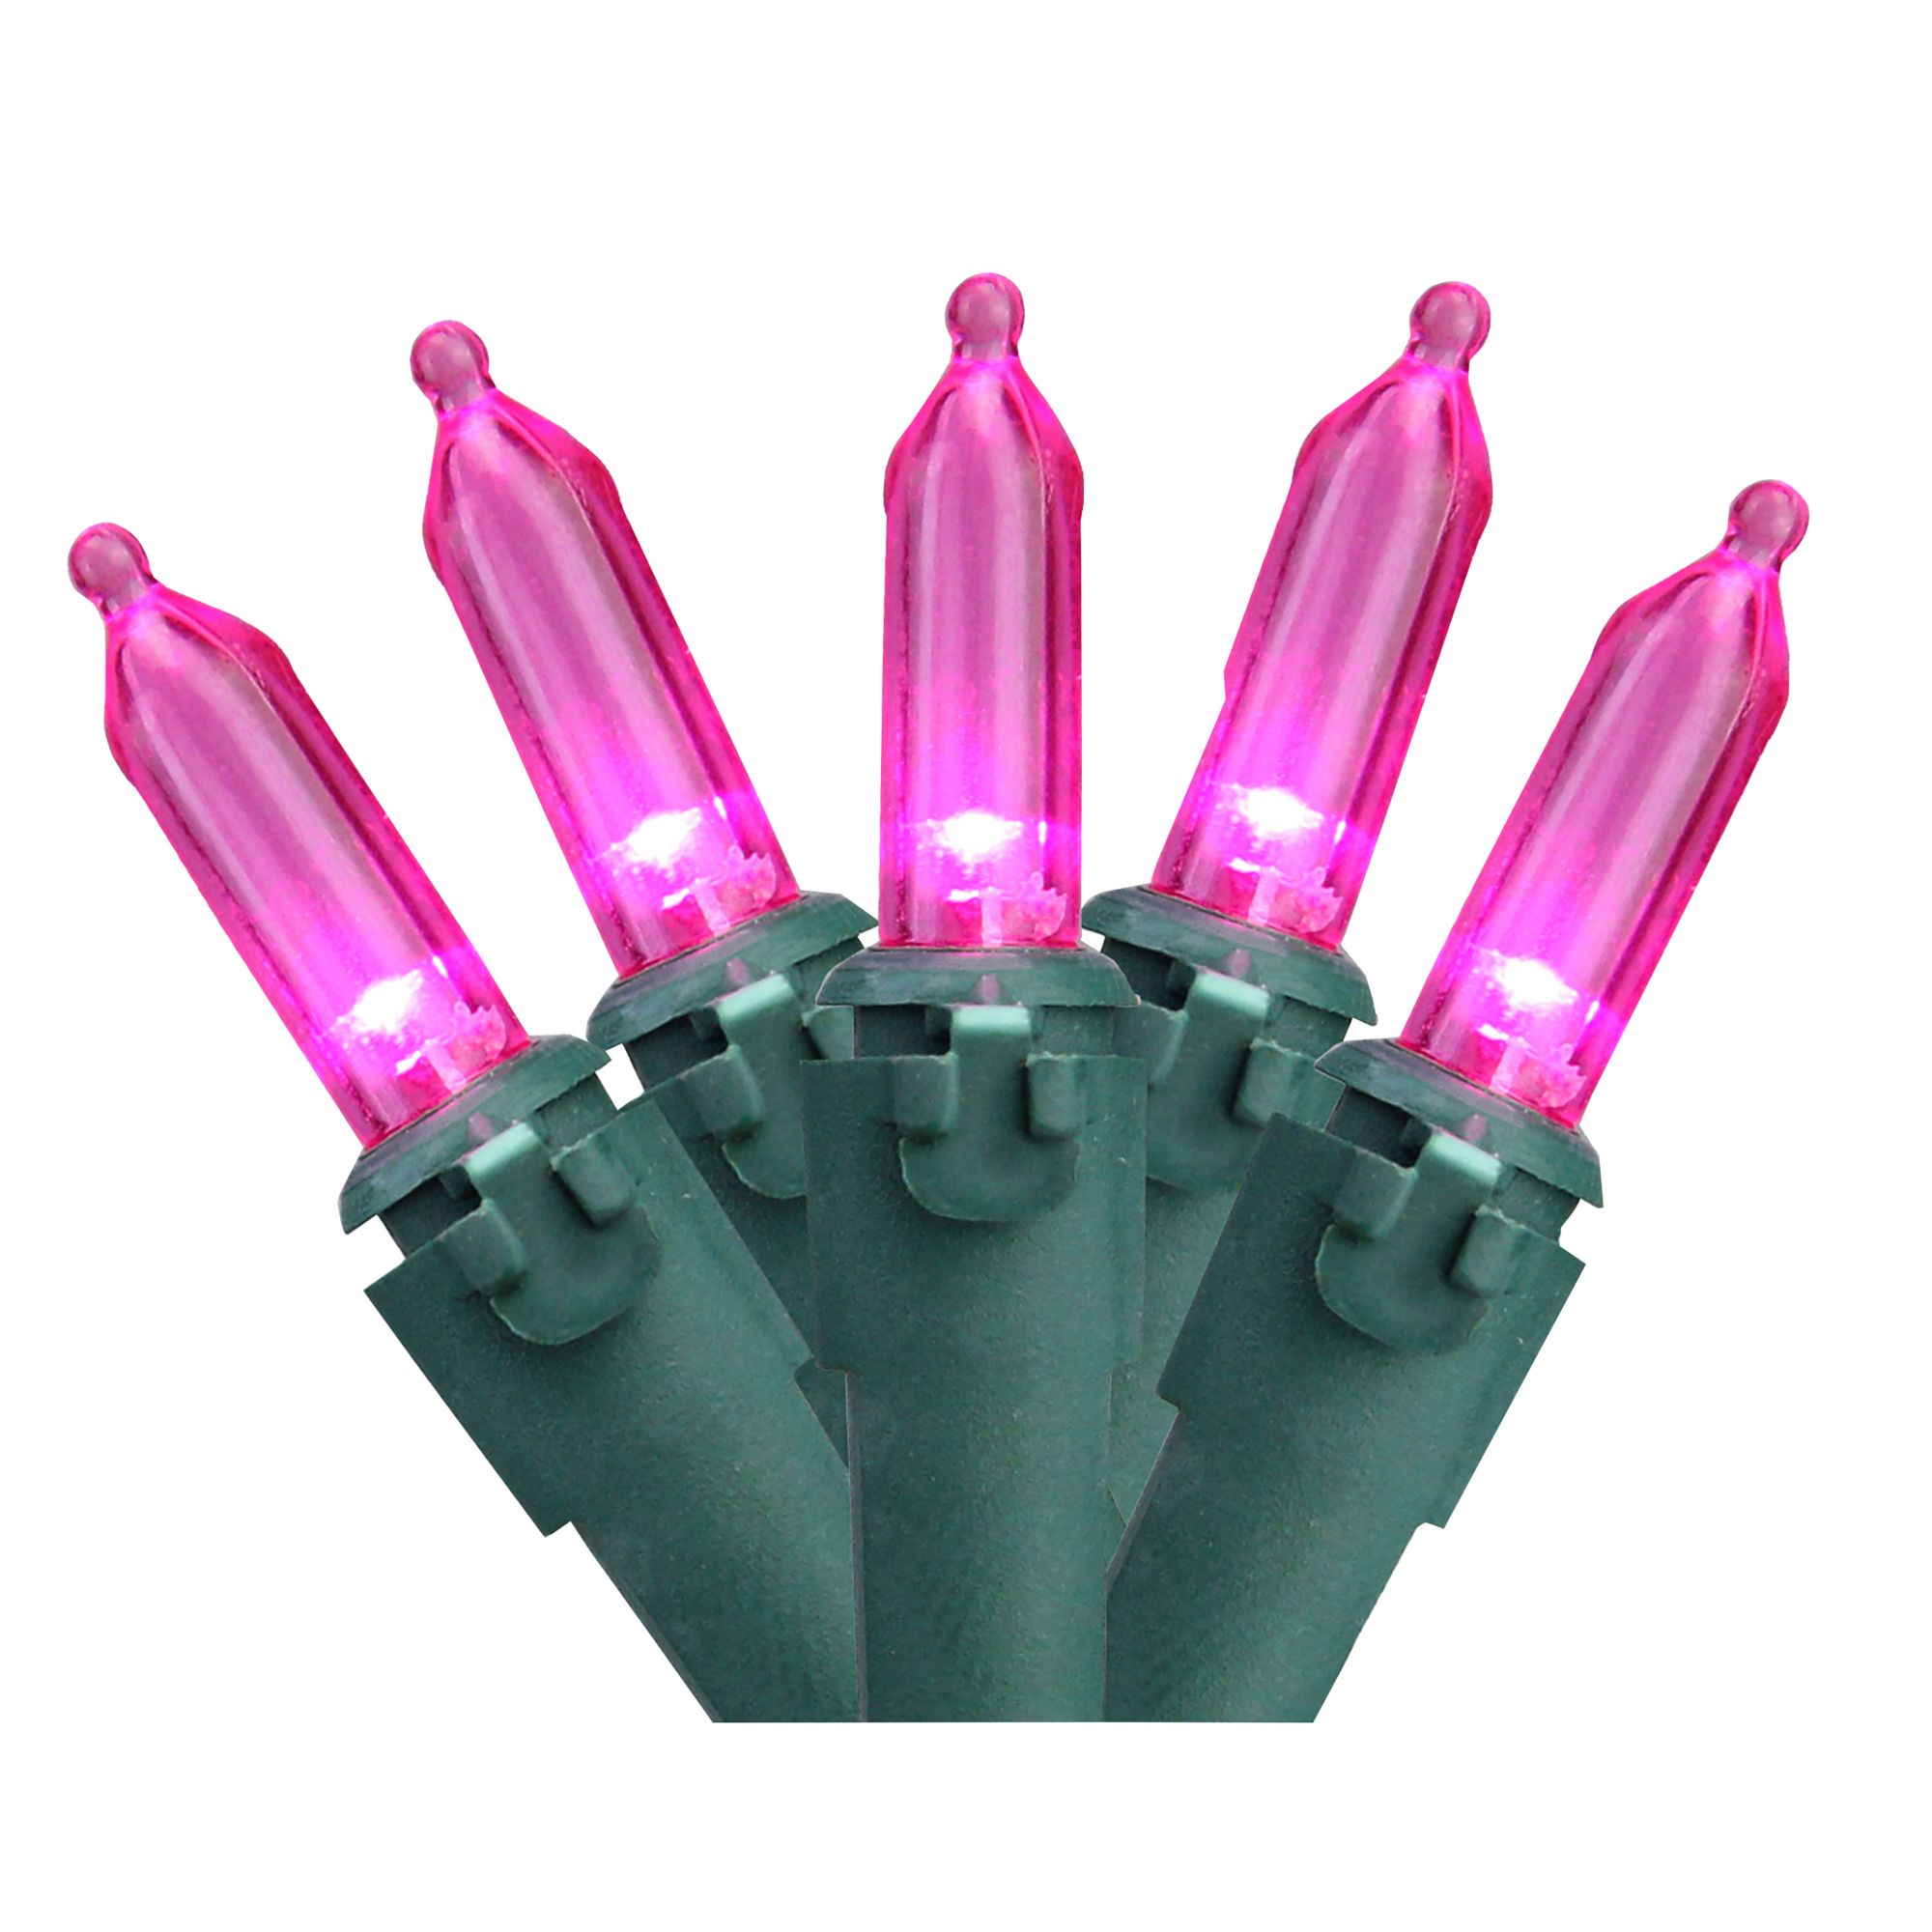 Northlight 33' 100-Ct. String Christmas Lights - Pink with Green Wire